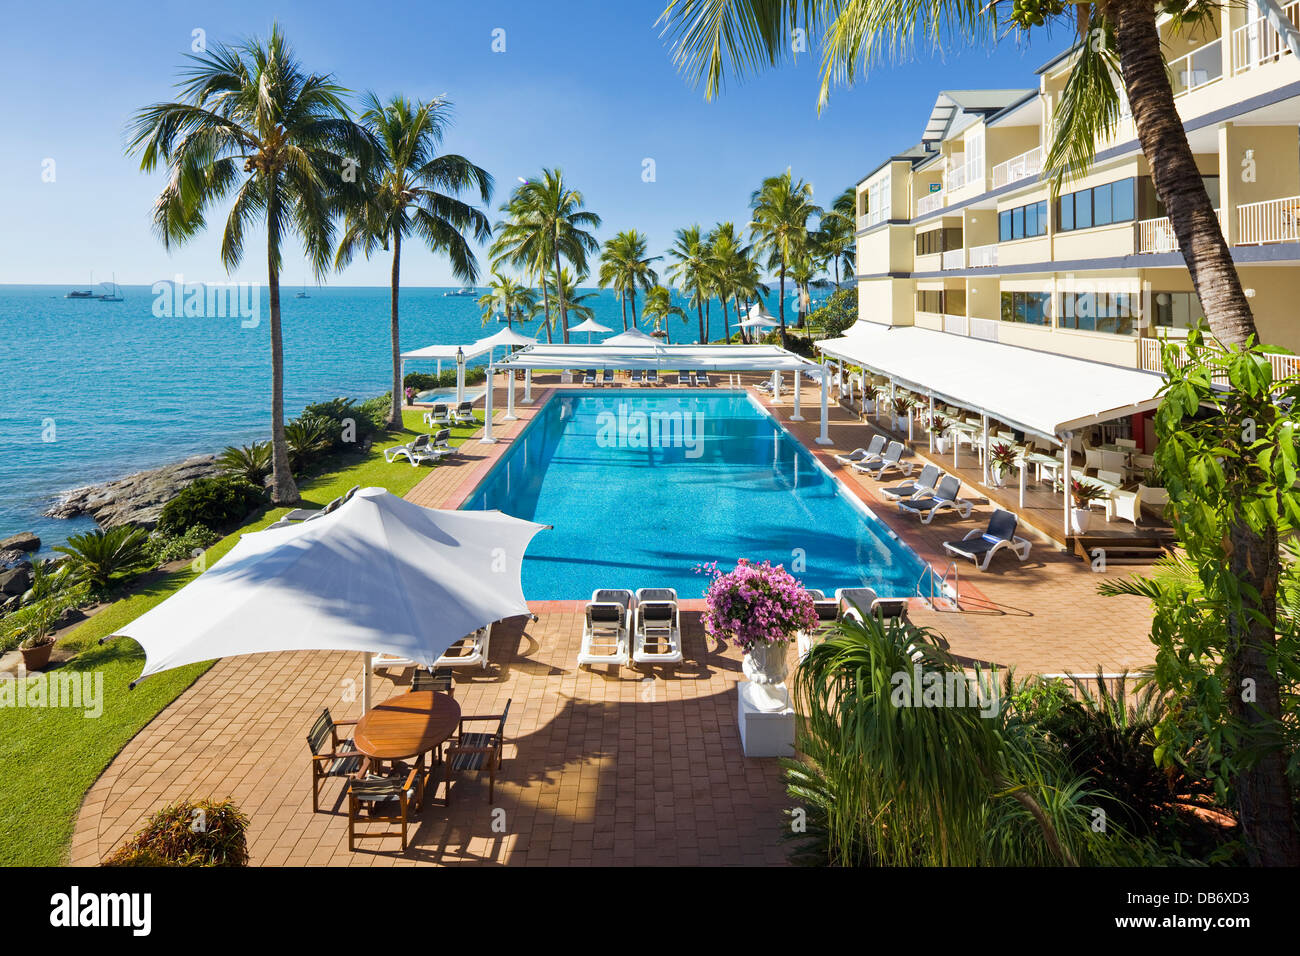 Swimming pool at the Coral Sea Resort. Airlie Beach, Whitsundays, Queensland, Australia Stock Photo